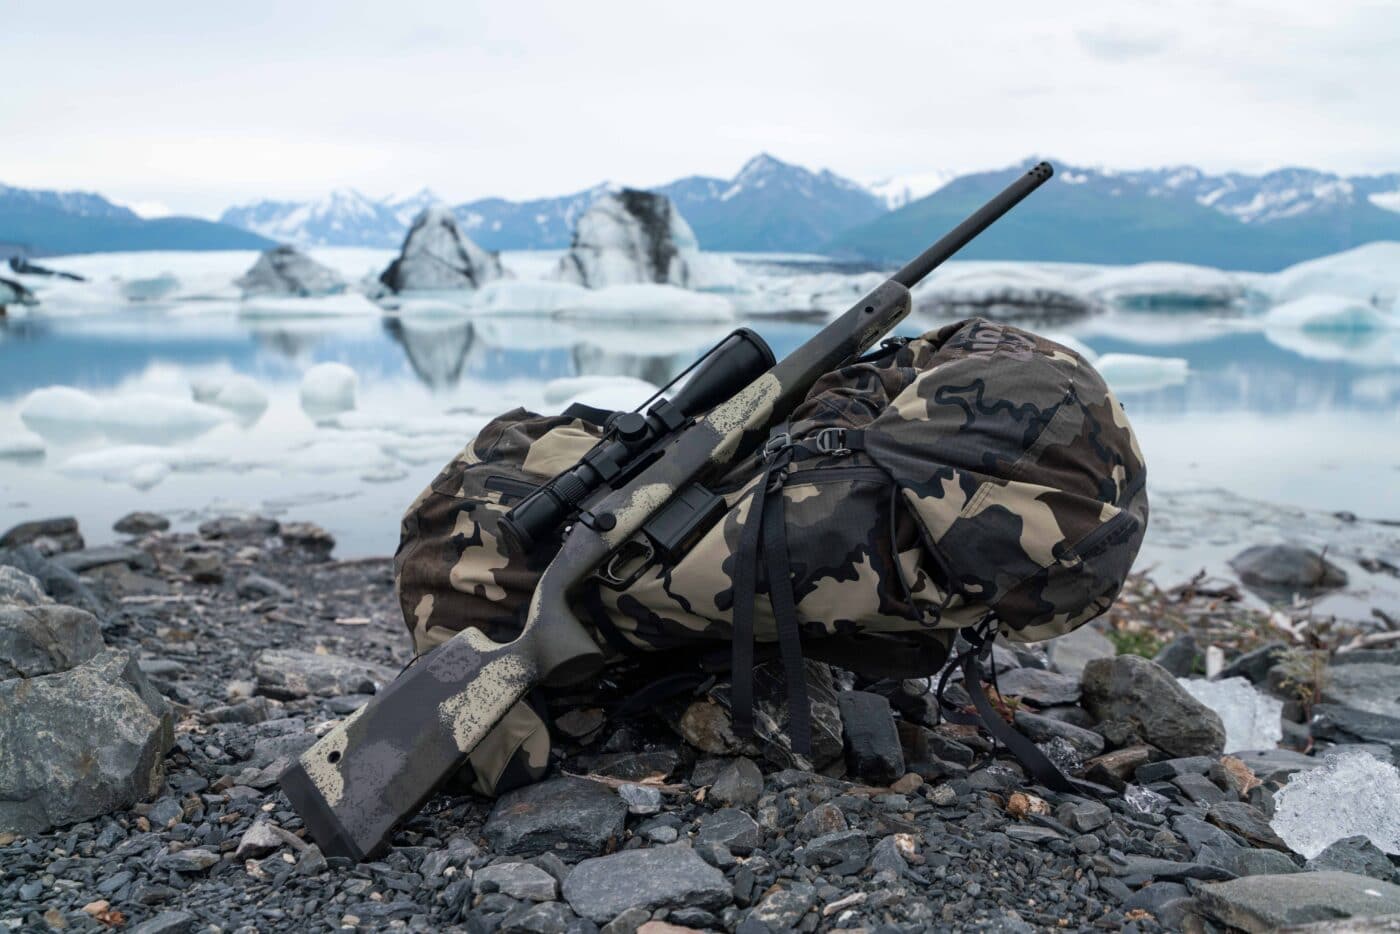 Springfield Armory Model 2020 Waypoint rifle resting on a backpack in the Alaskan wilderness